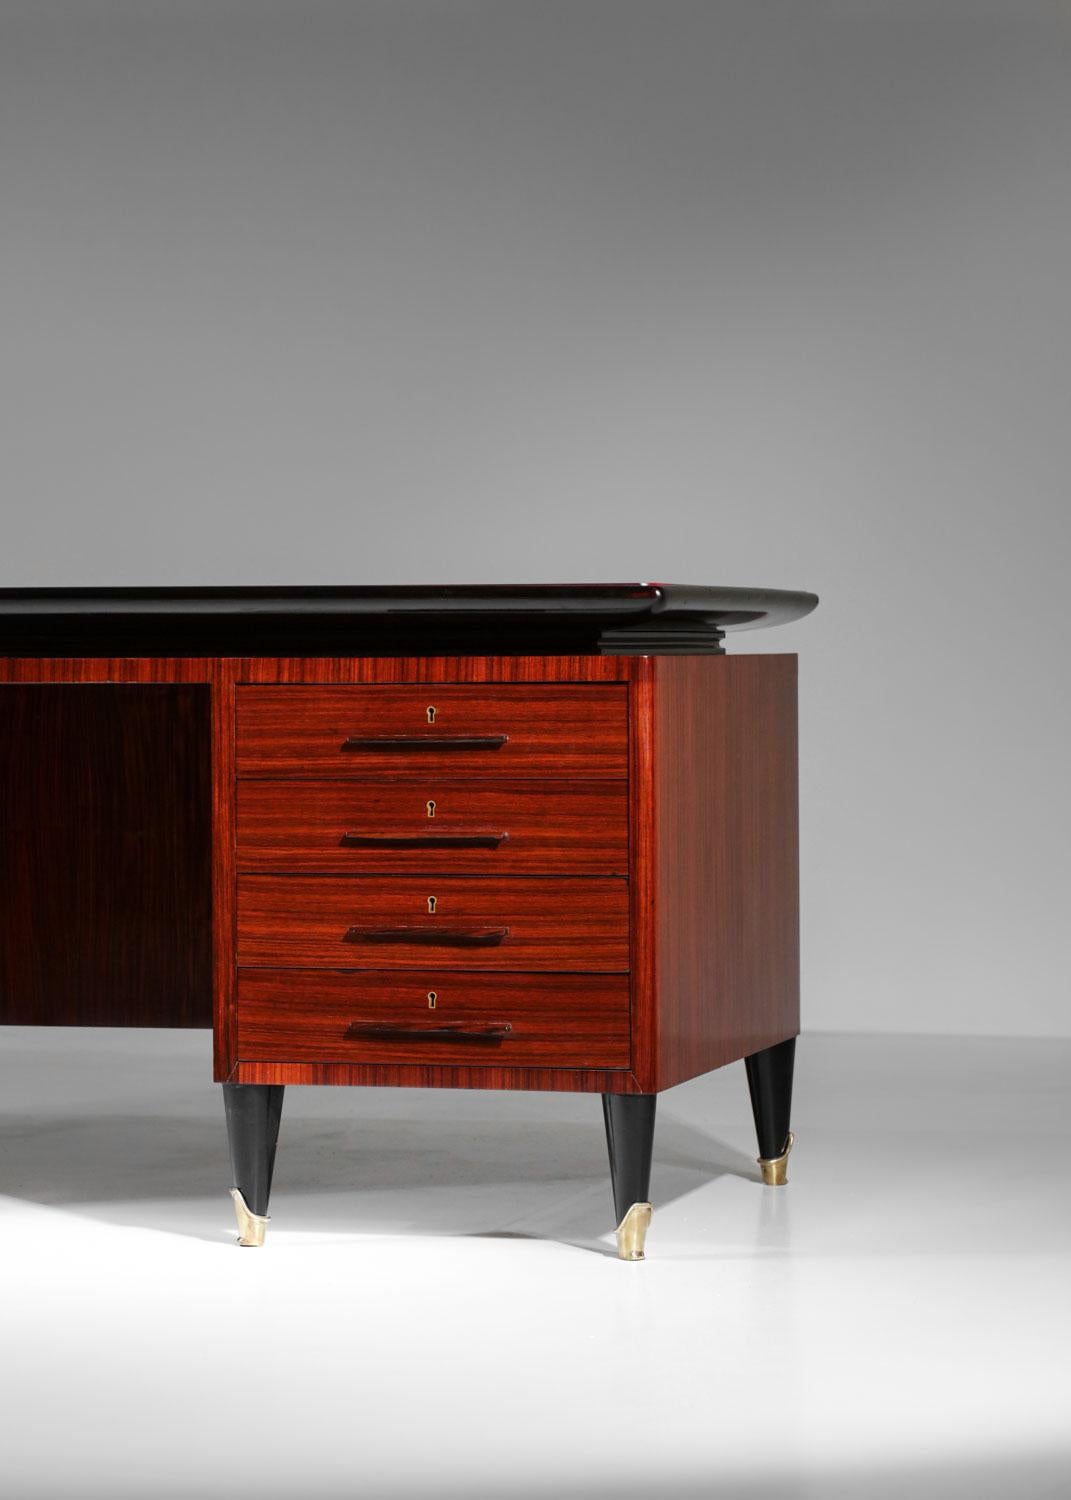 Mid-Century Modern Italian large Desk by Vittorio Dassi solid wood and glass 60s - G725 For Sale